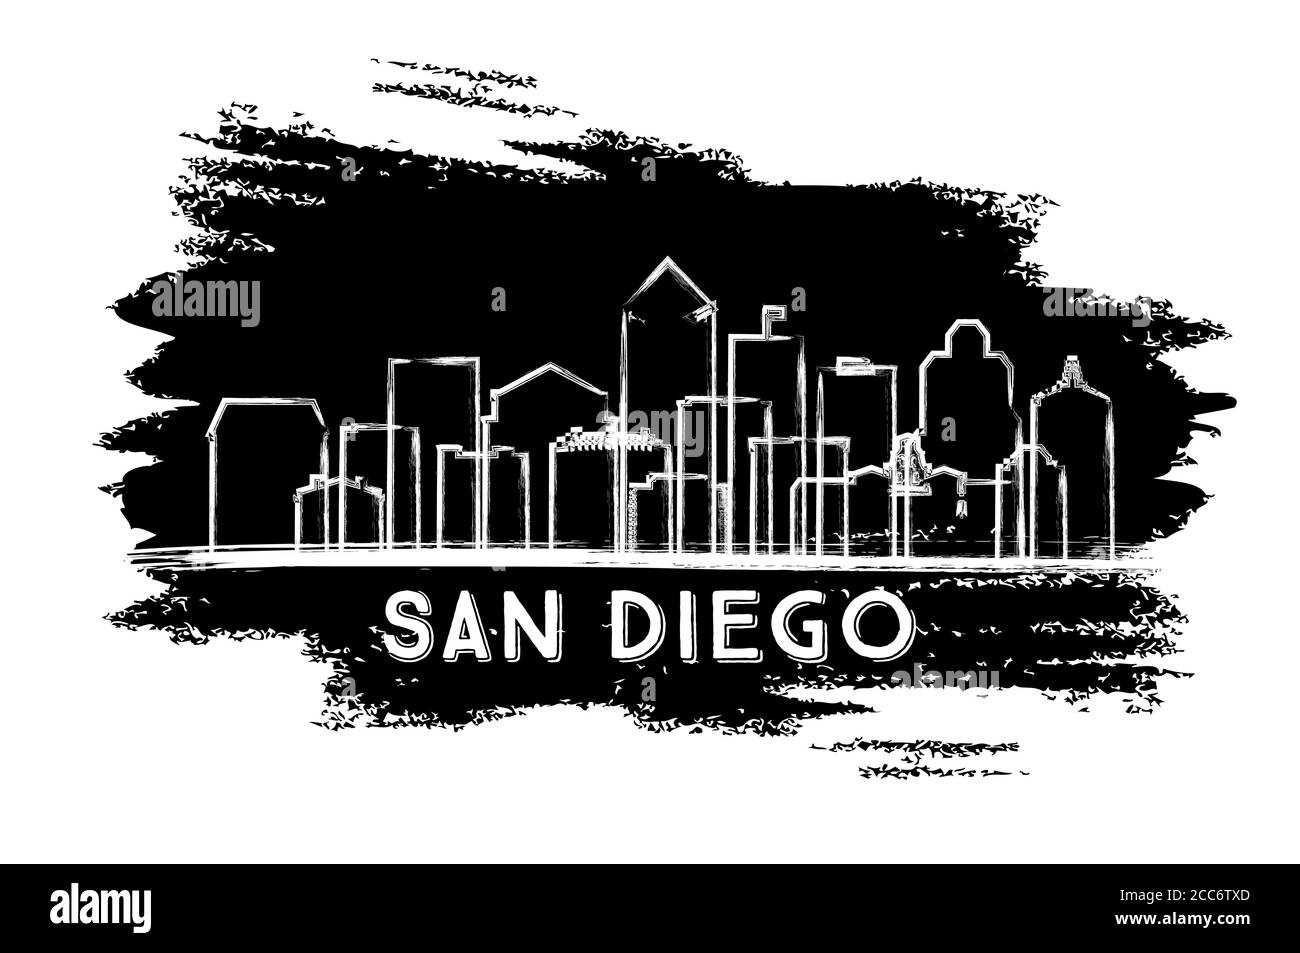 San Diego California City Skyline Silhouette. Hand Drawn Sketch. Business Travel and Tourism Concept with Historic Architecture. Vector Illustration. Stock Vector